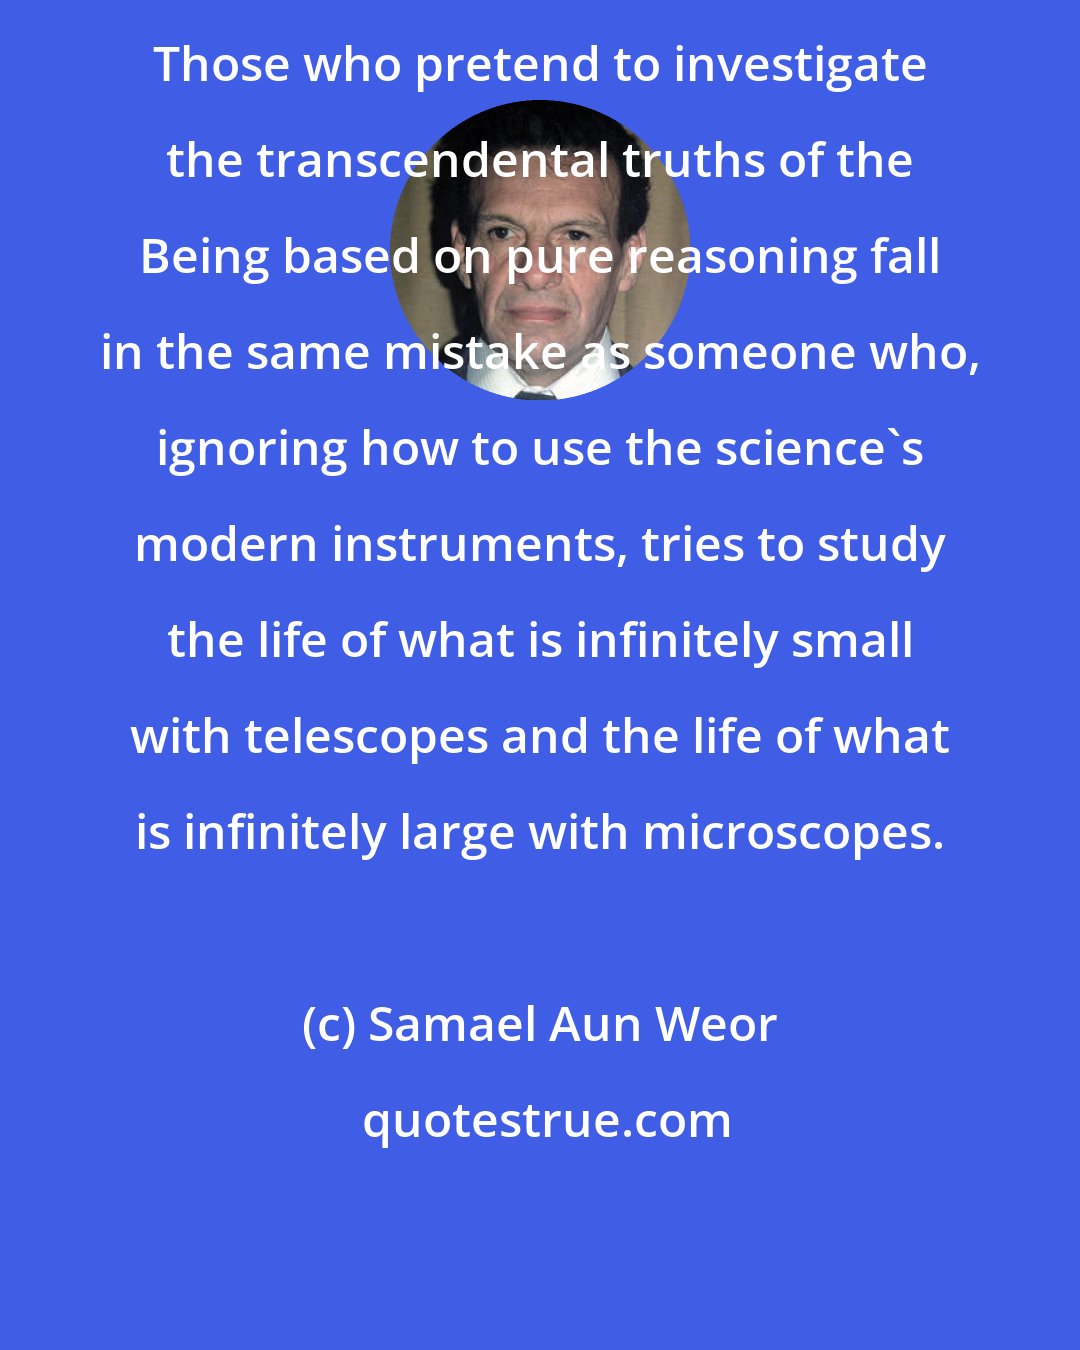 Samael Aun Weor: Those who pretend to investigate the transcendental truths of the Being based on pure reasoning fall in the same mistake as someone who, ignoring how to use the science's modern instruments, tries to study the life of what is infinitely small with telescopes and the life of what is infinitely large with microscopes.